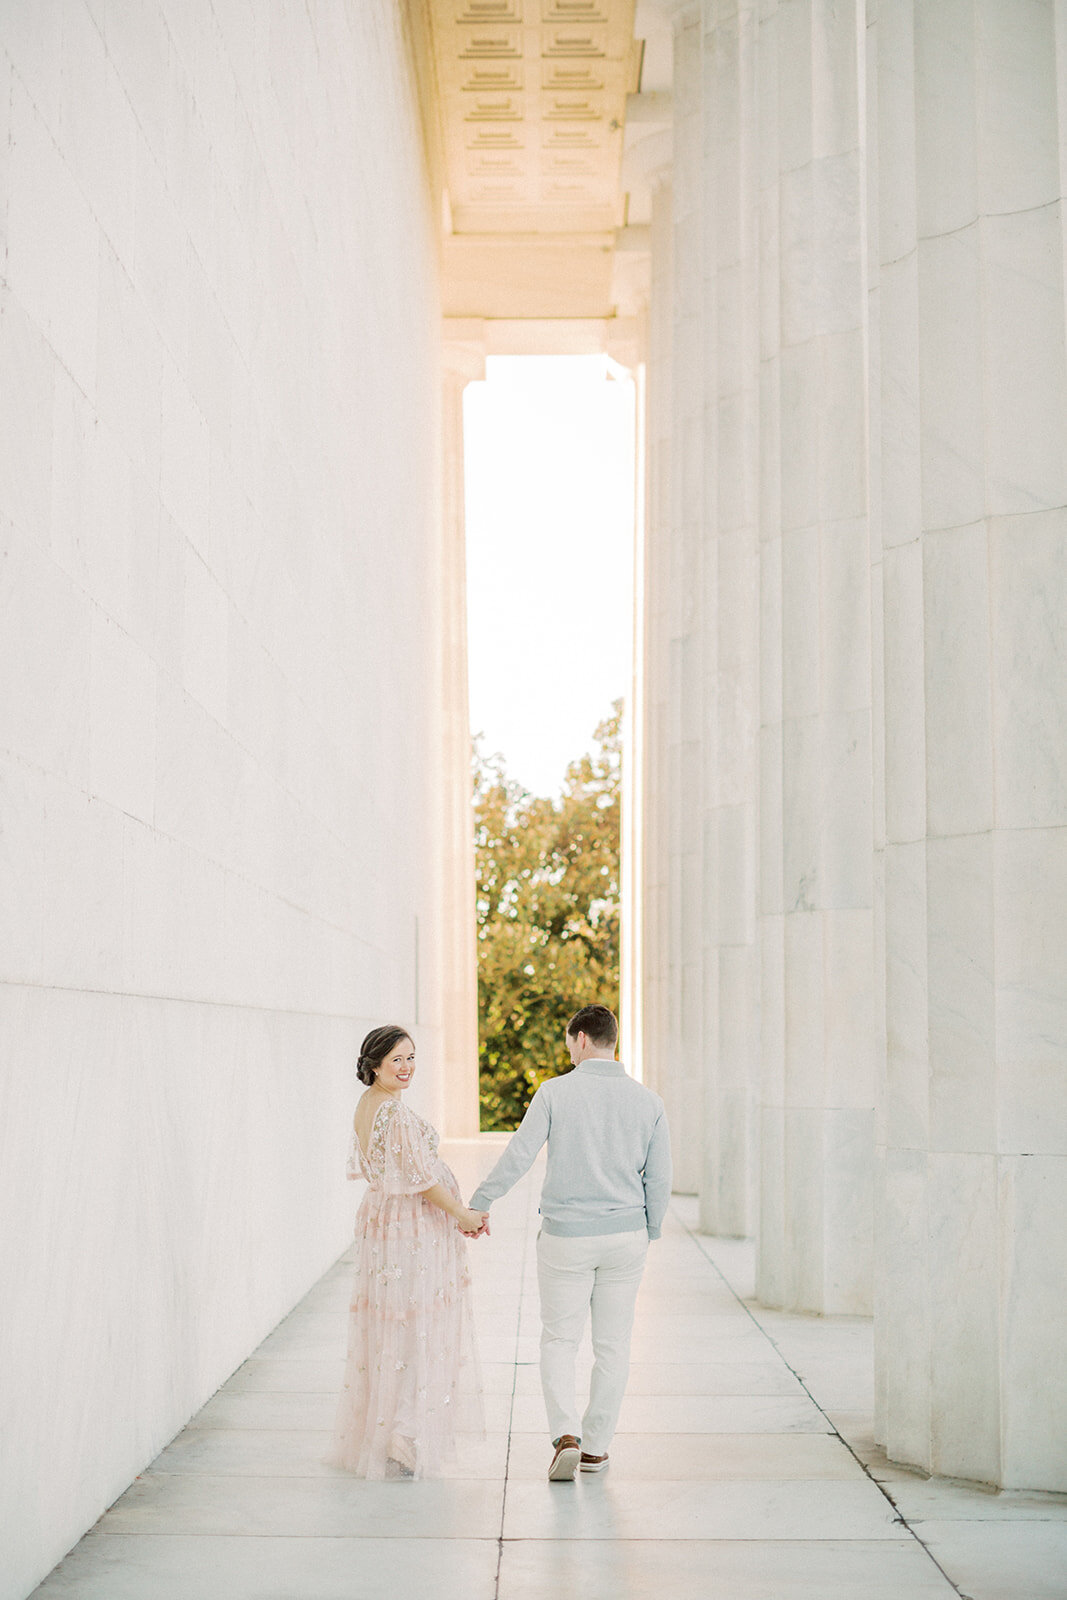 Husband and wife walk together at Lincoln Memorial as wife turns to look back at the camera.